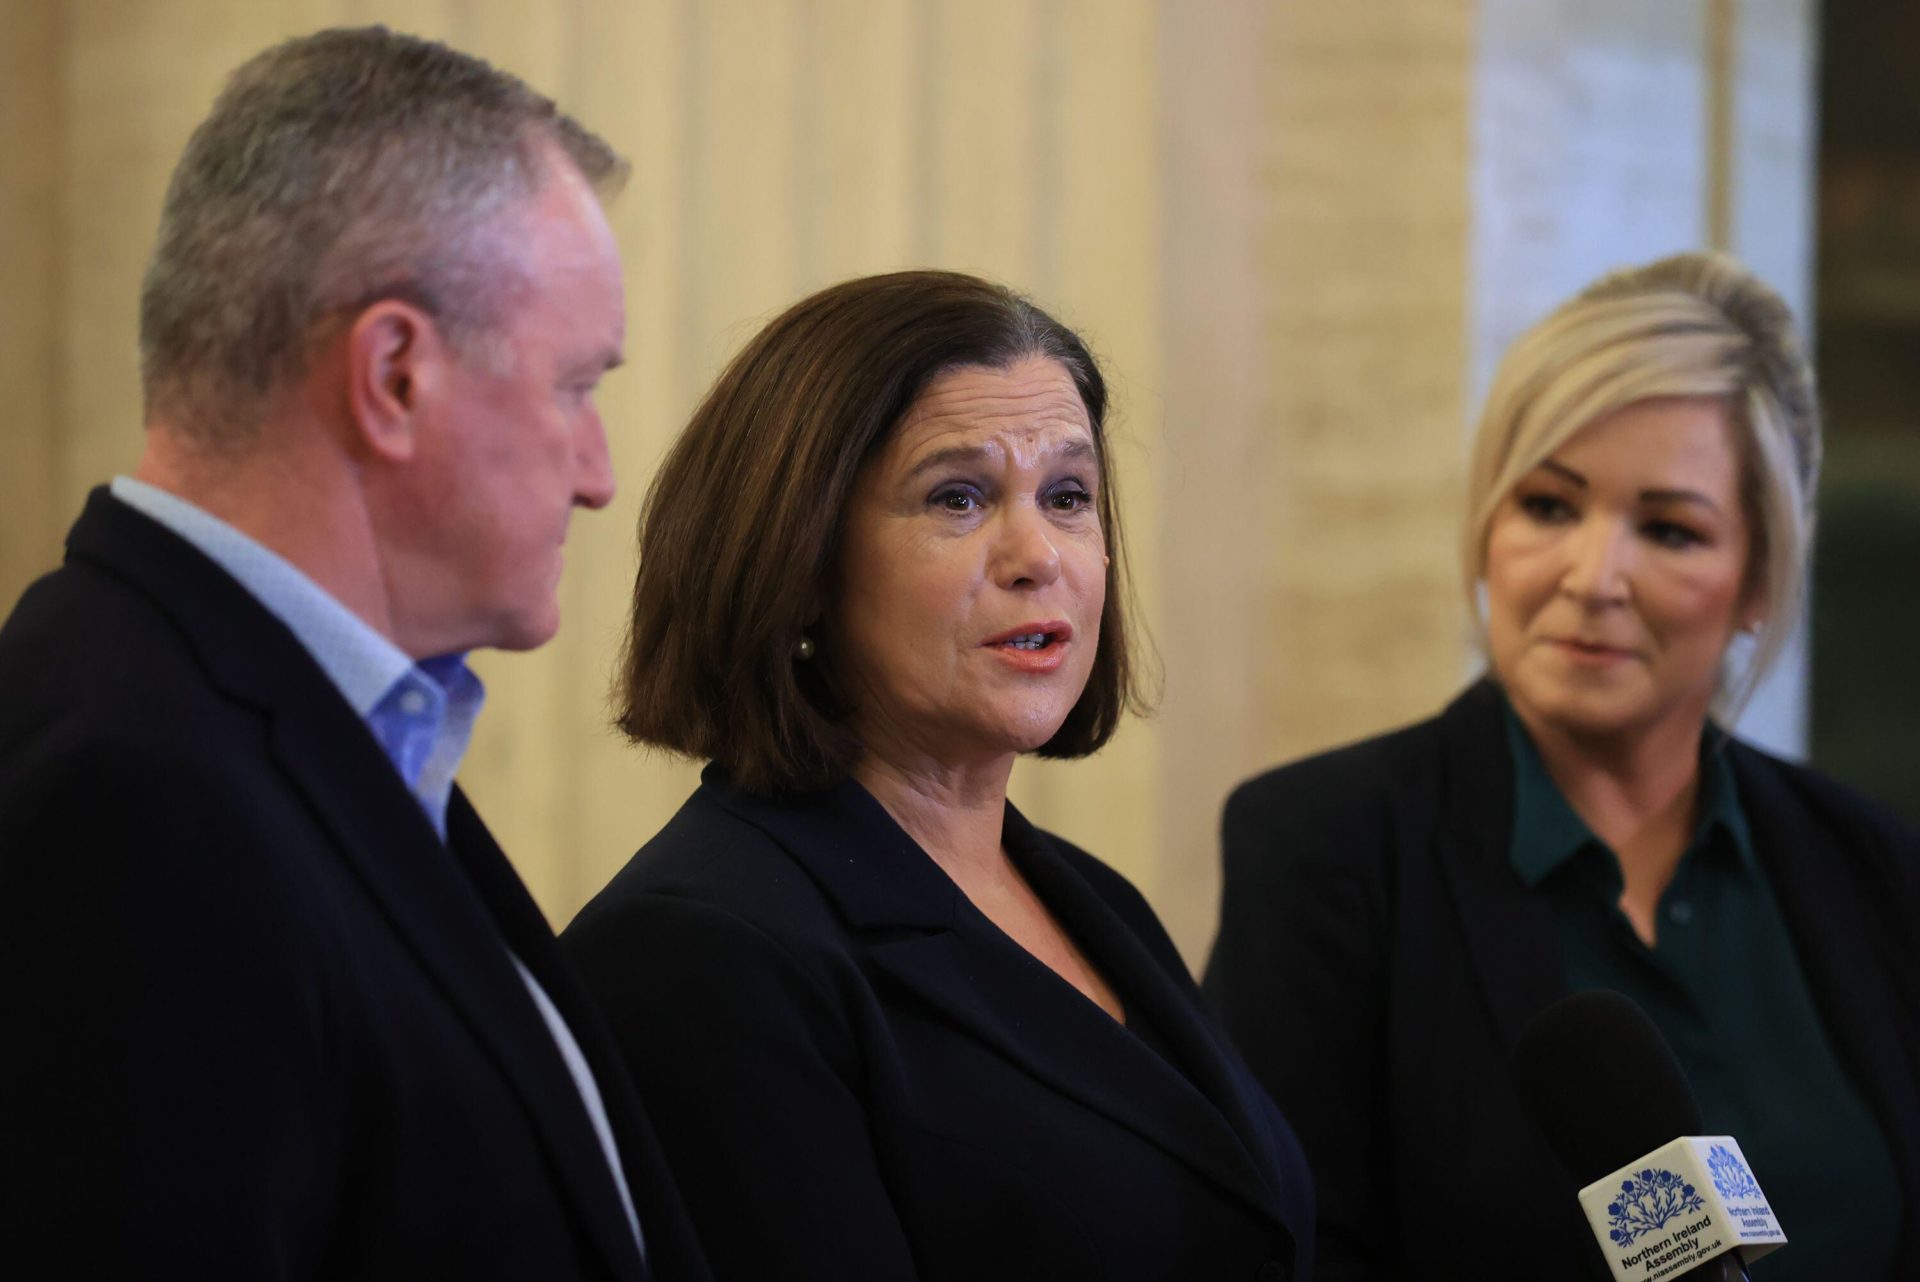 Sinn Fein’s Conor Murphy, Mary Lou McDonald and Michelle O'Neill in the Great Hall at Stormont, Belfast